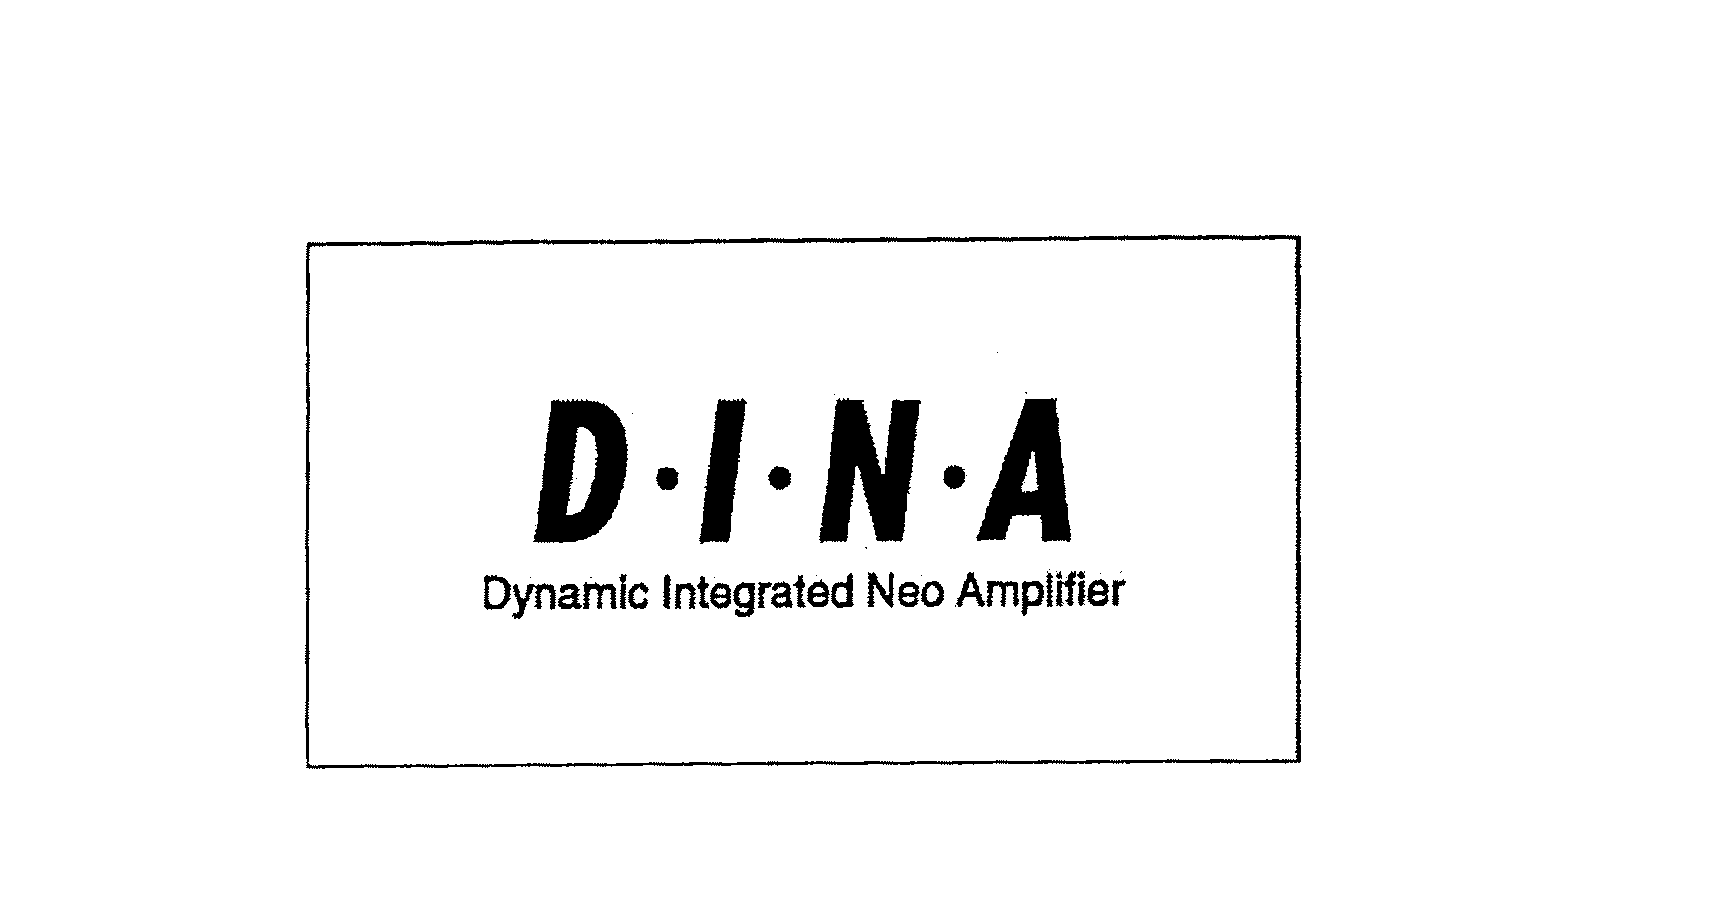  DINA DYNAMIC INTEGRATED NEO AMPLIFIER